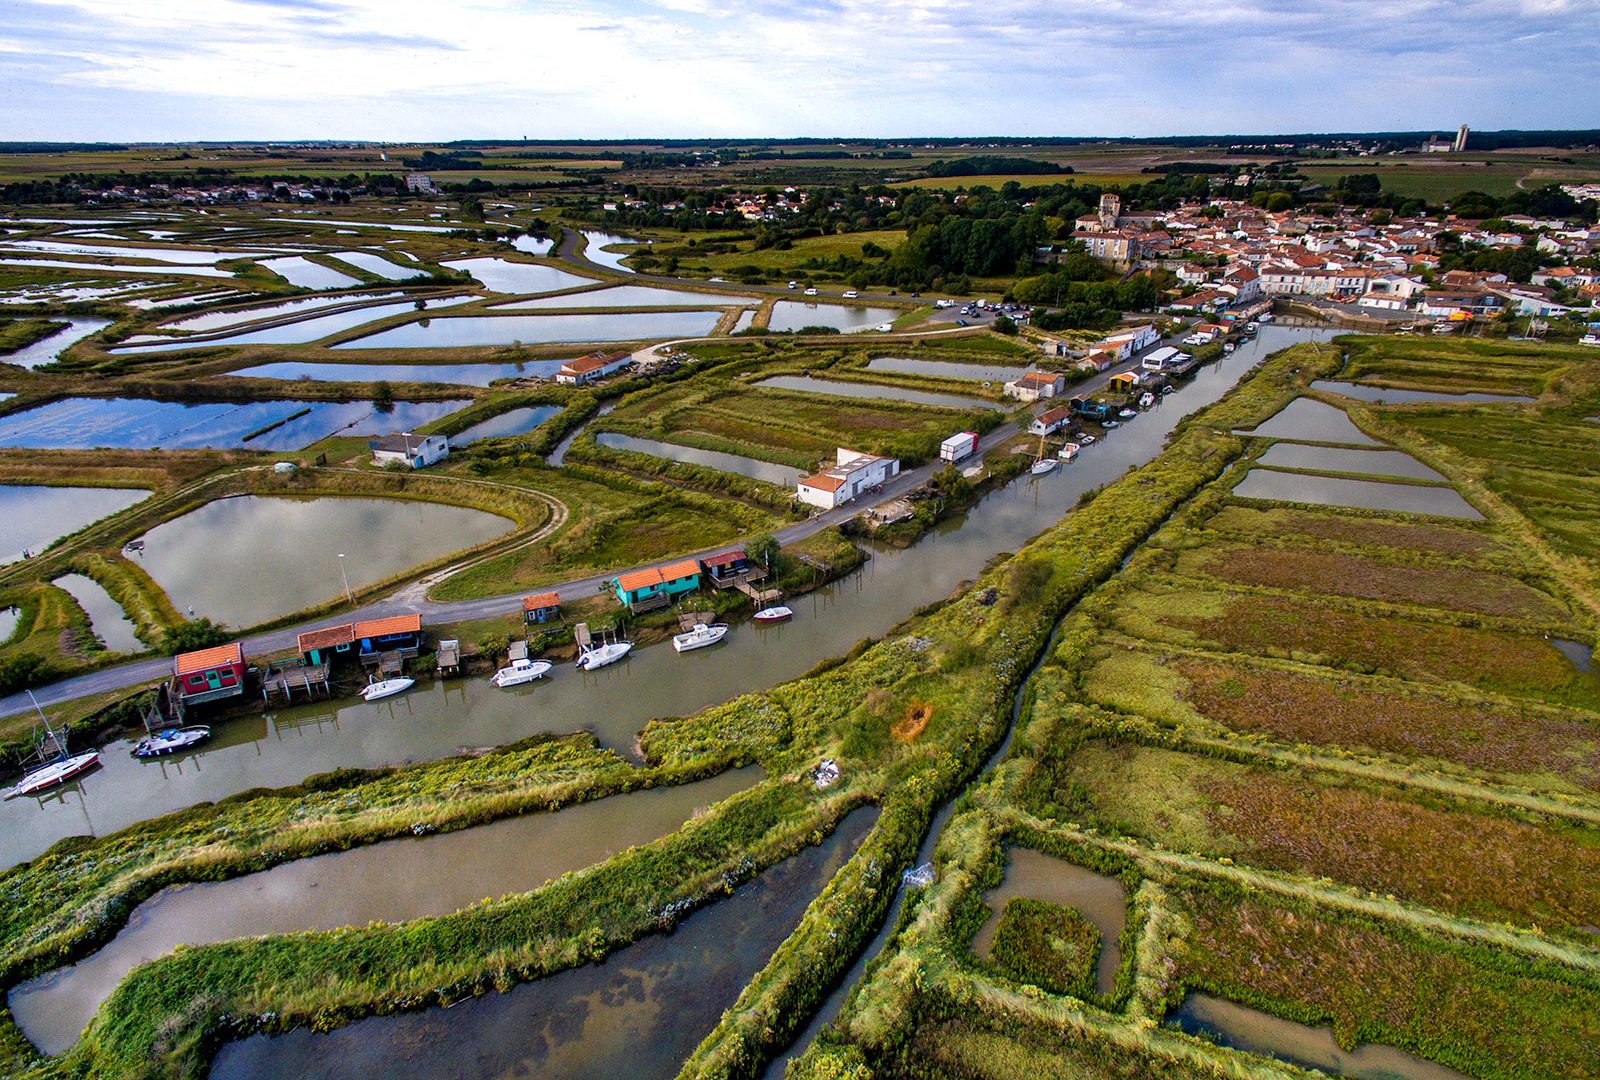 Aerial view of the Mornac-sur-Seudre channel